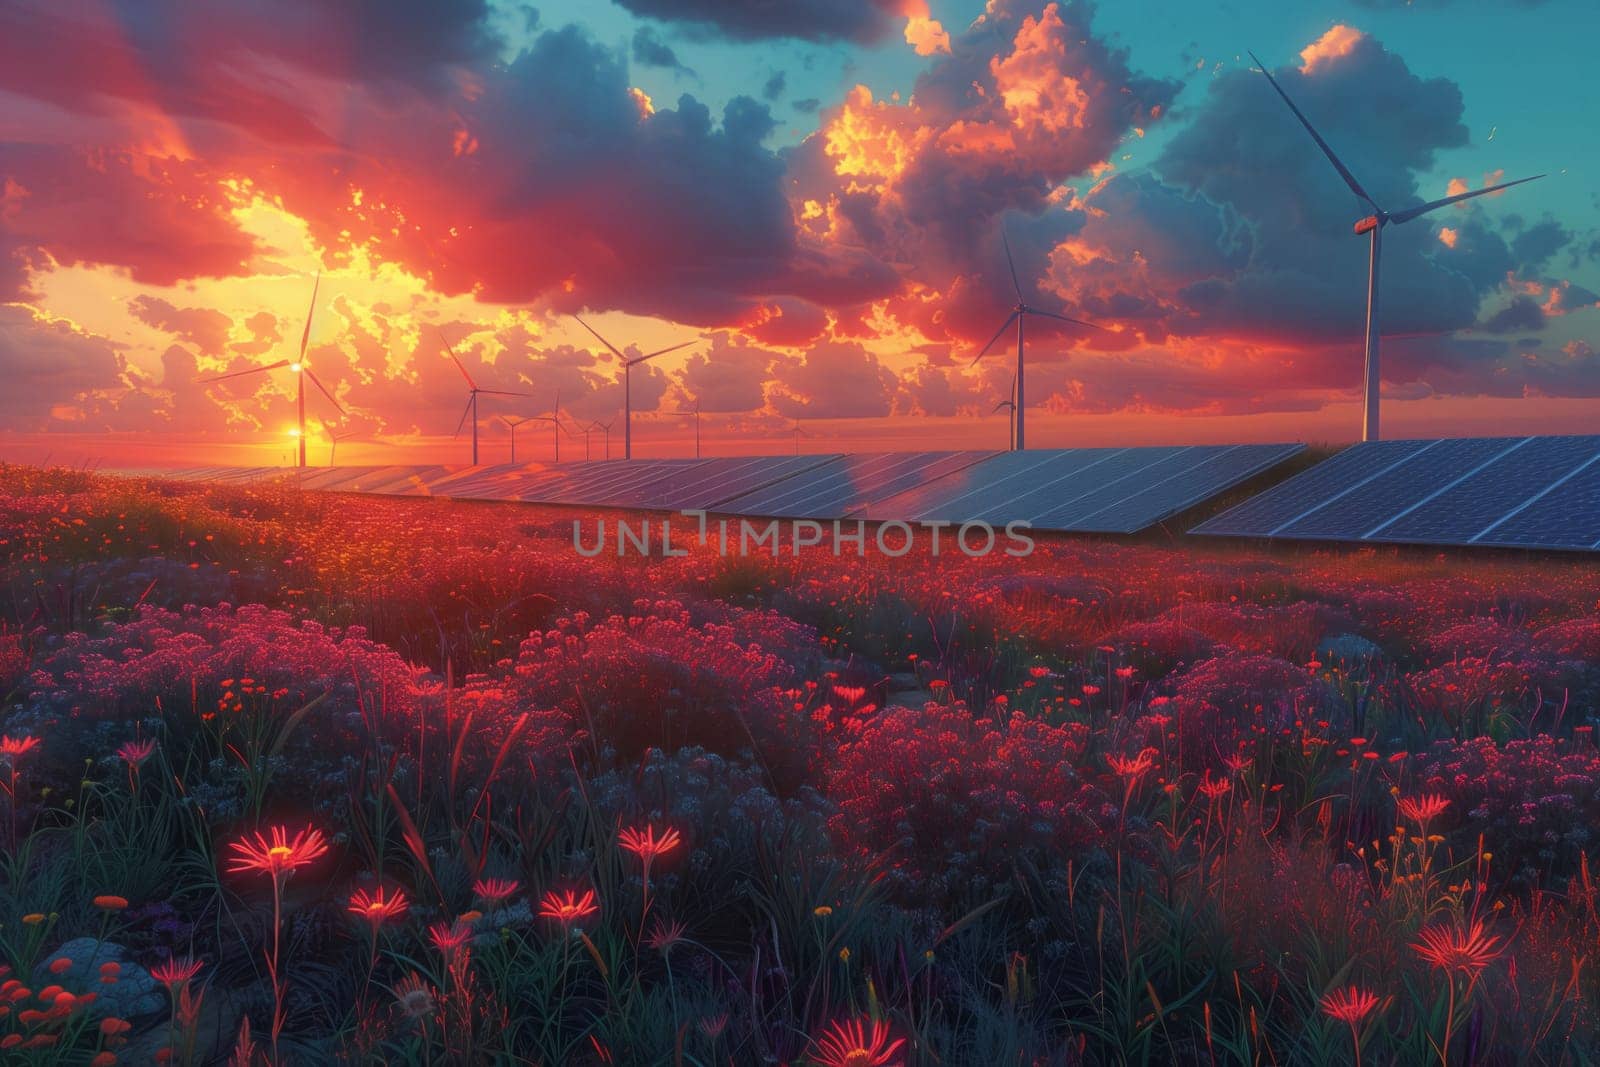 A natural landscape with fields of flowers, windmills, and solar panels under the colorful afterglow of the sunset sky, with clouds scattered across the atmosphere